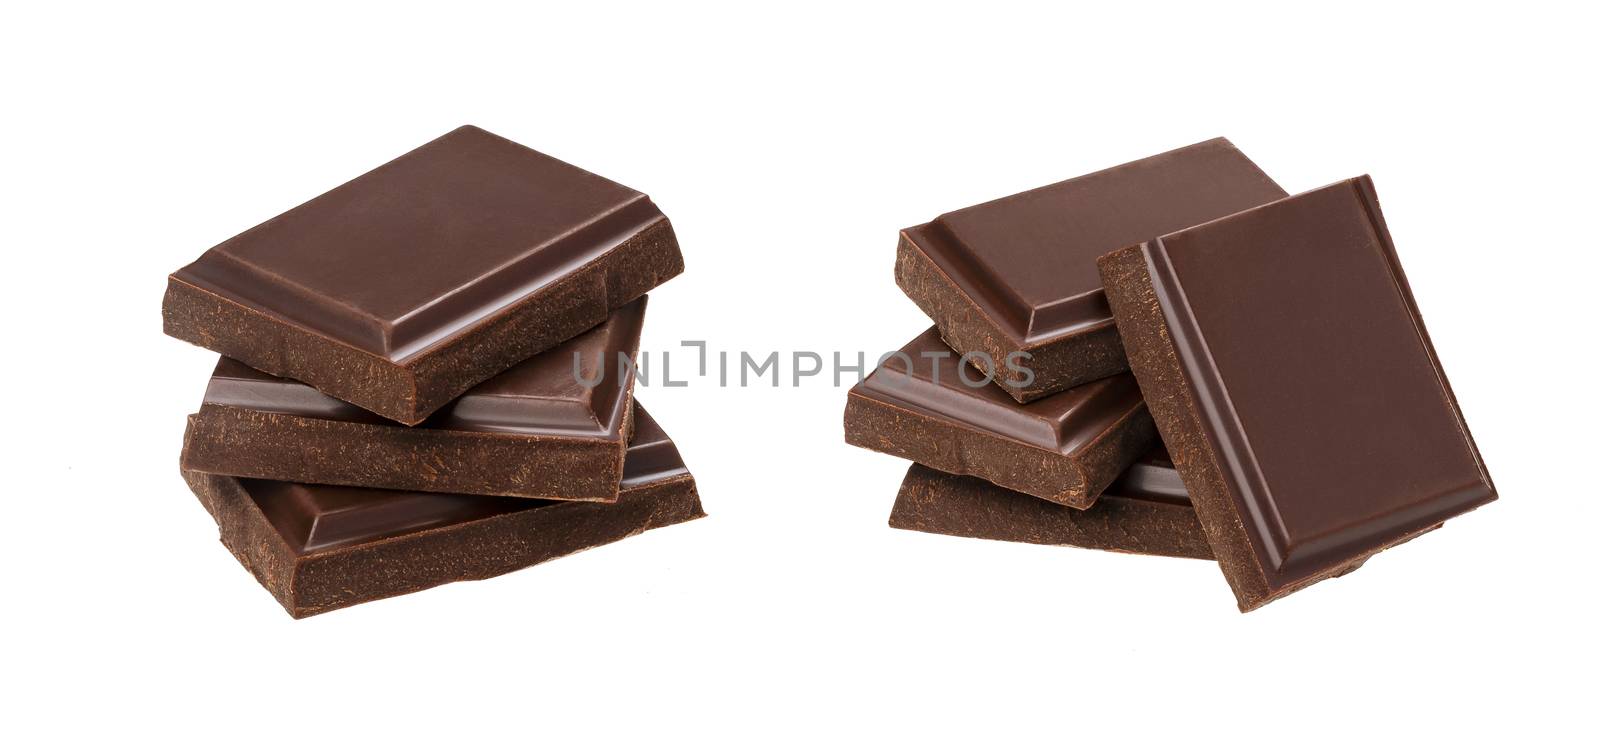 Dark chocolate bars isolated on white background. Stack of chocolate pieces, closeup by xamtiw